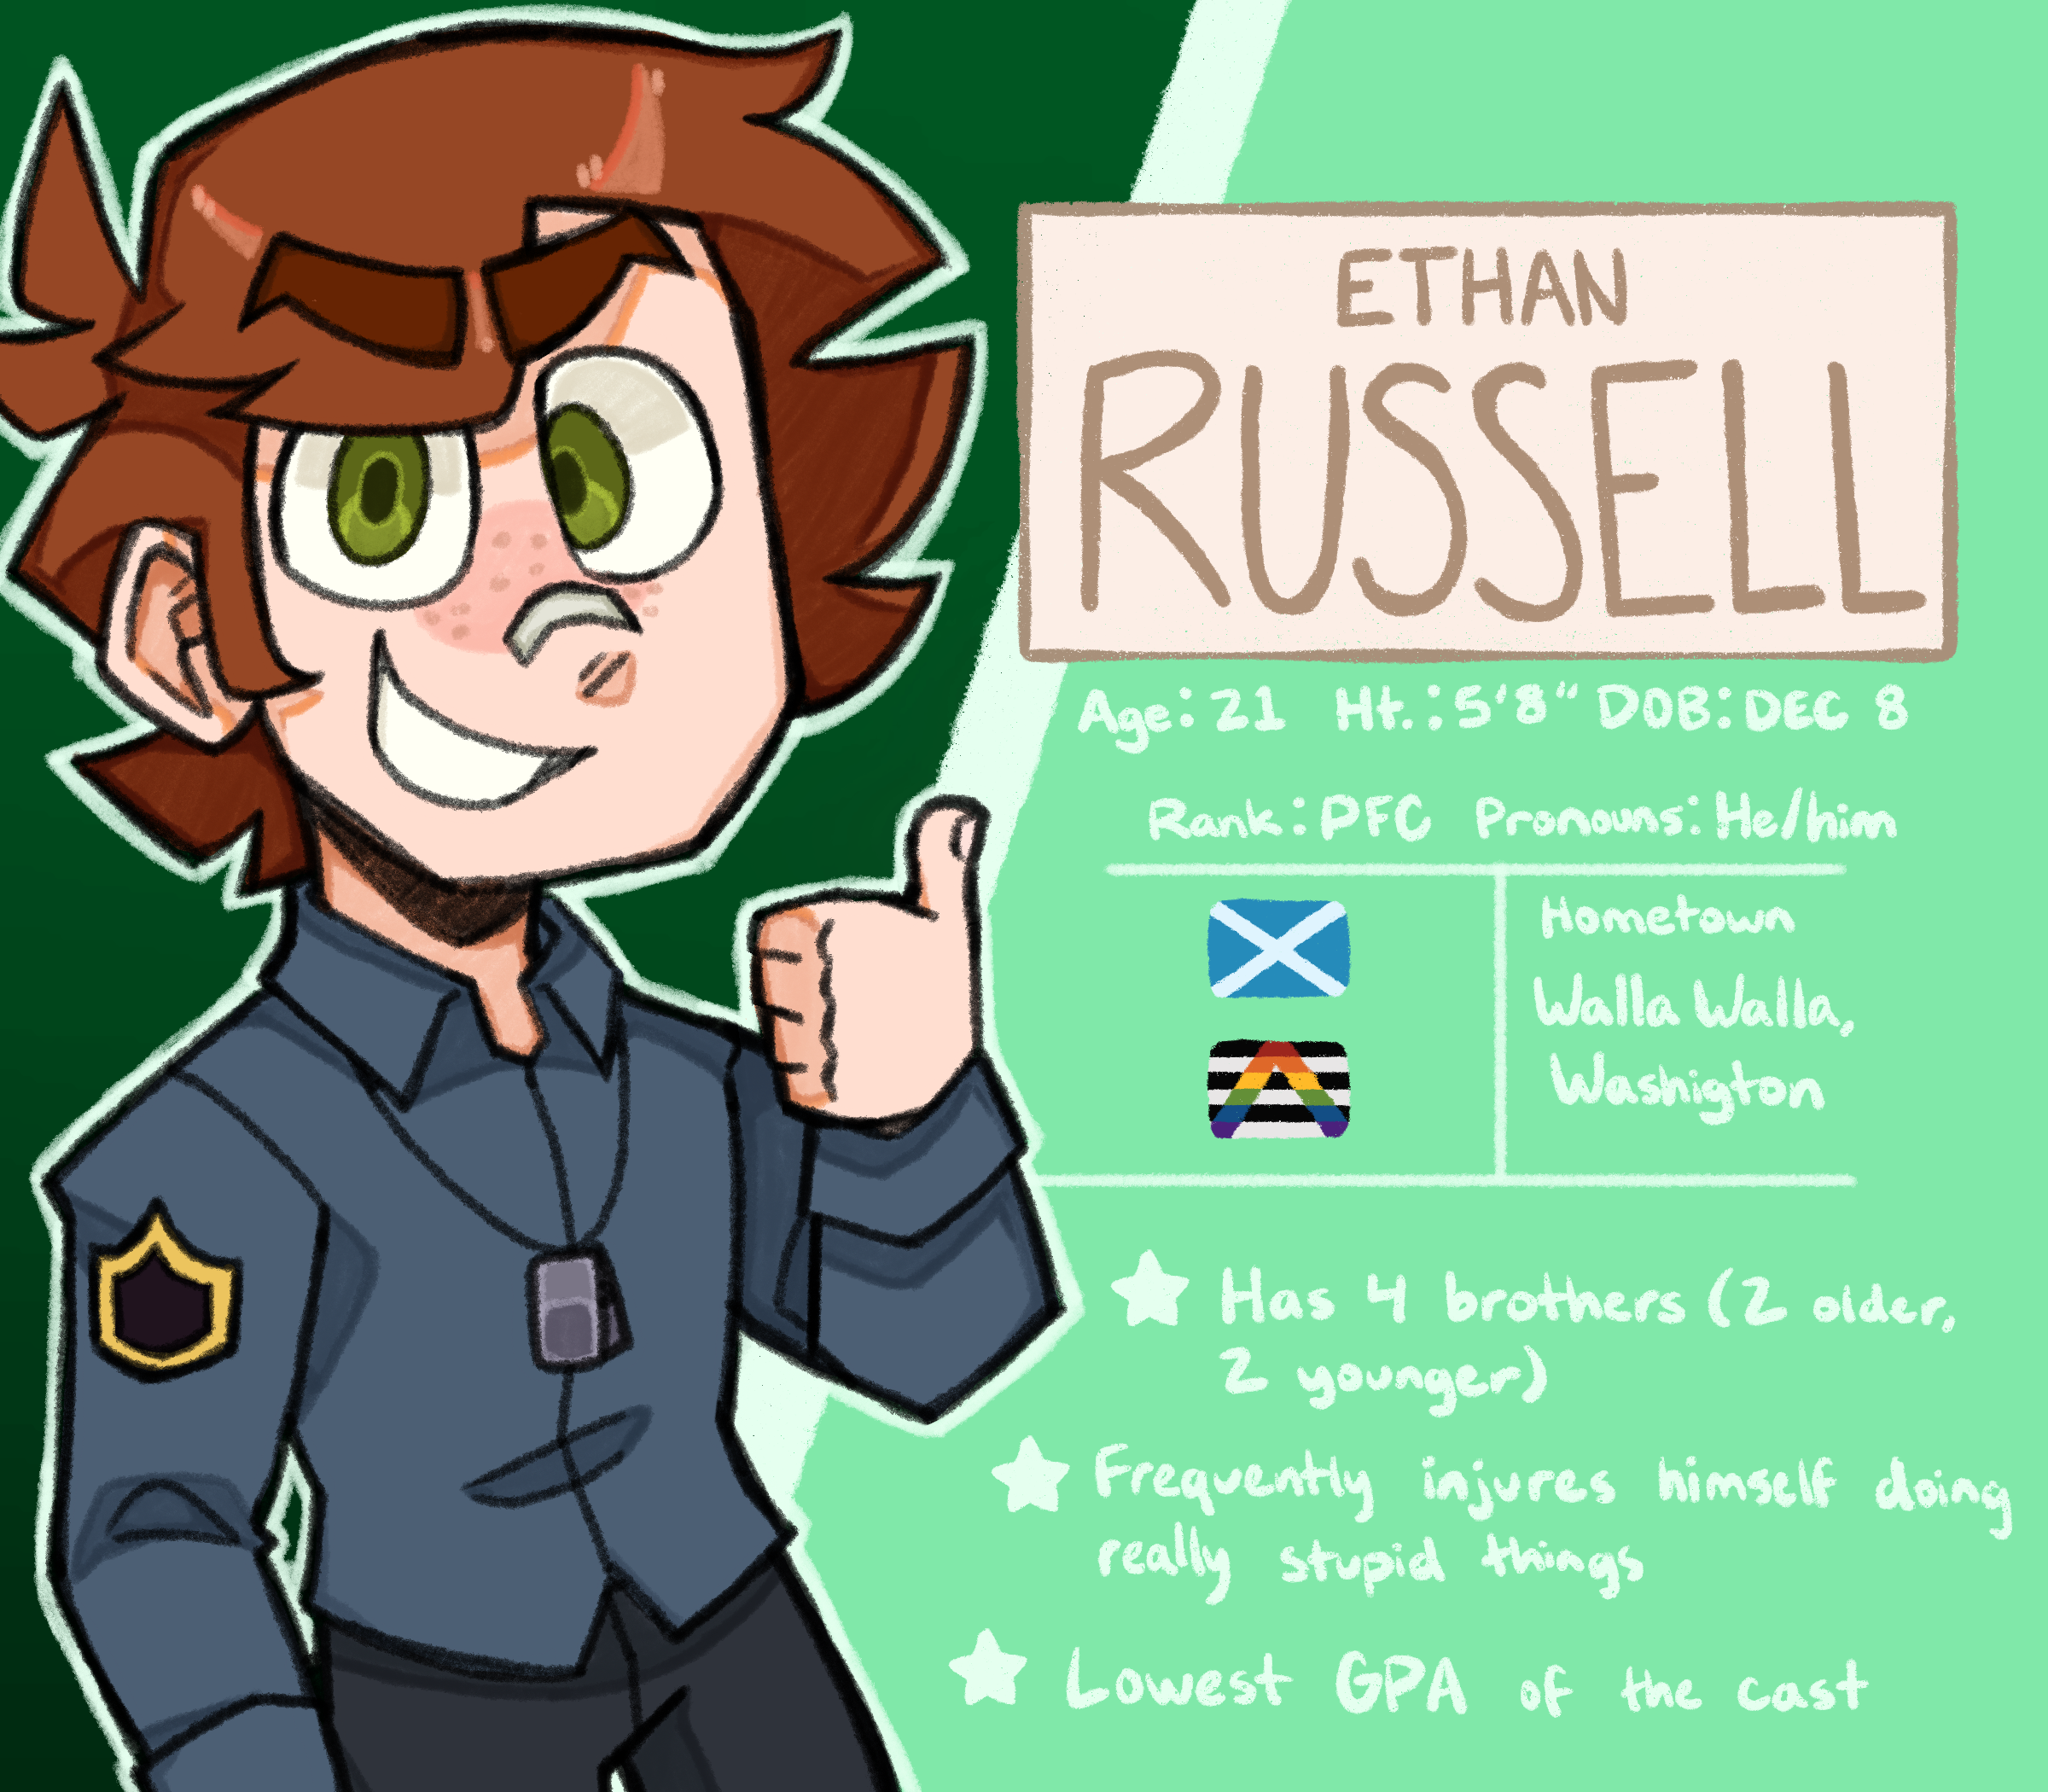 A character bio for Ethan Russell. Age: 21, Height: 5'8, Date of Birth: December 8. Rank: Private First Class, Pronouns: He/him. Russell is of Scottish descent, and identifies as a cisgender straight ally. His hometown is Walla Walla, Washington. Fun facts include: He has 4 brothers (2 older, 2 younger), he frequently injures himself doing really stupid things, and he has the lowest GPA of the cast.